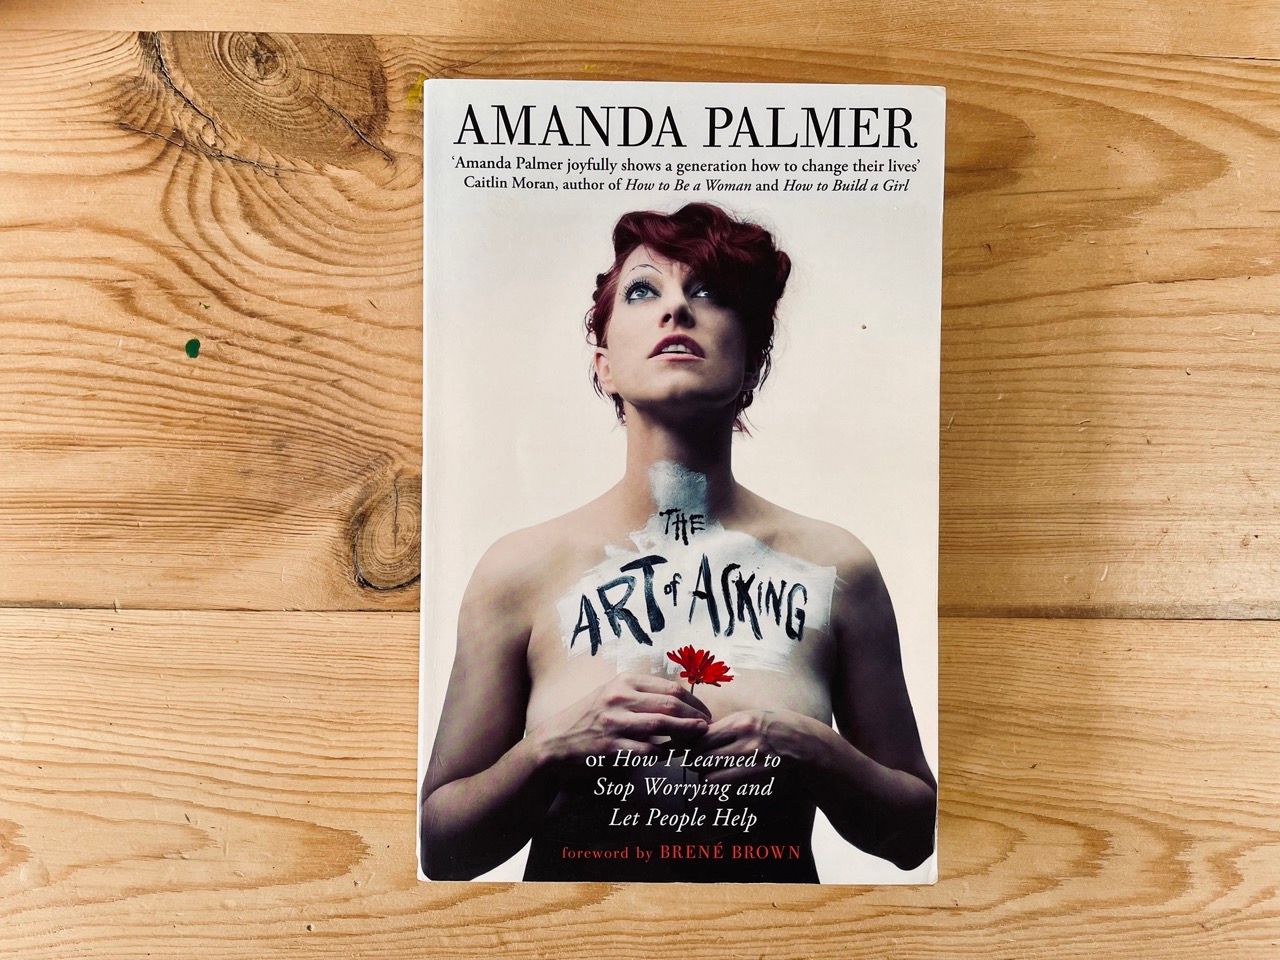 The Art of Asking by Amanda Palmer on a table with front cover on display